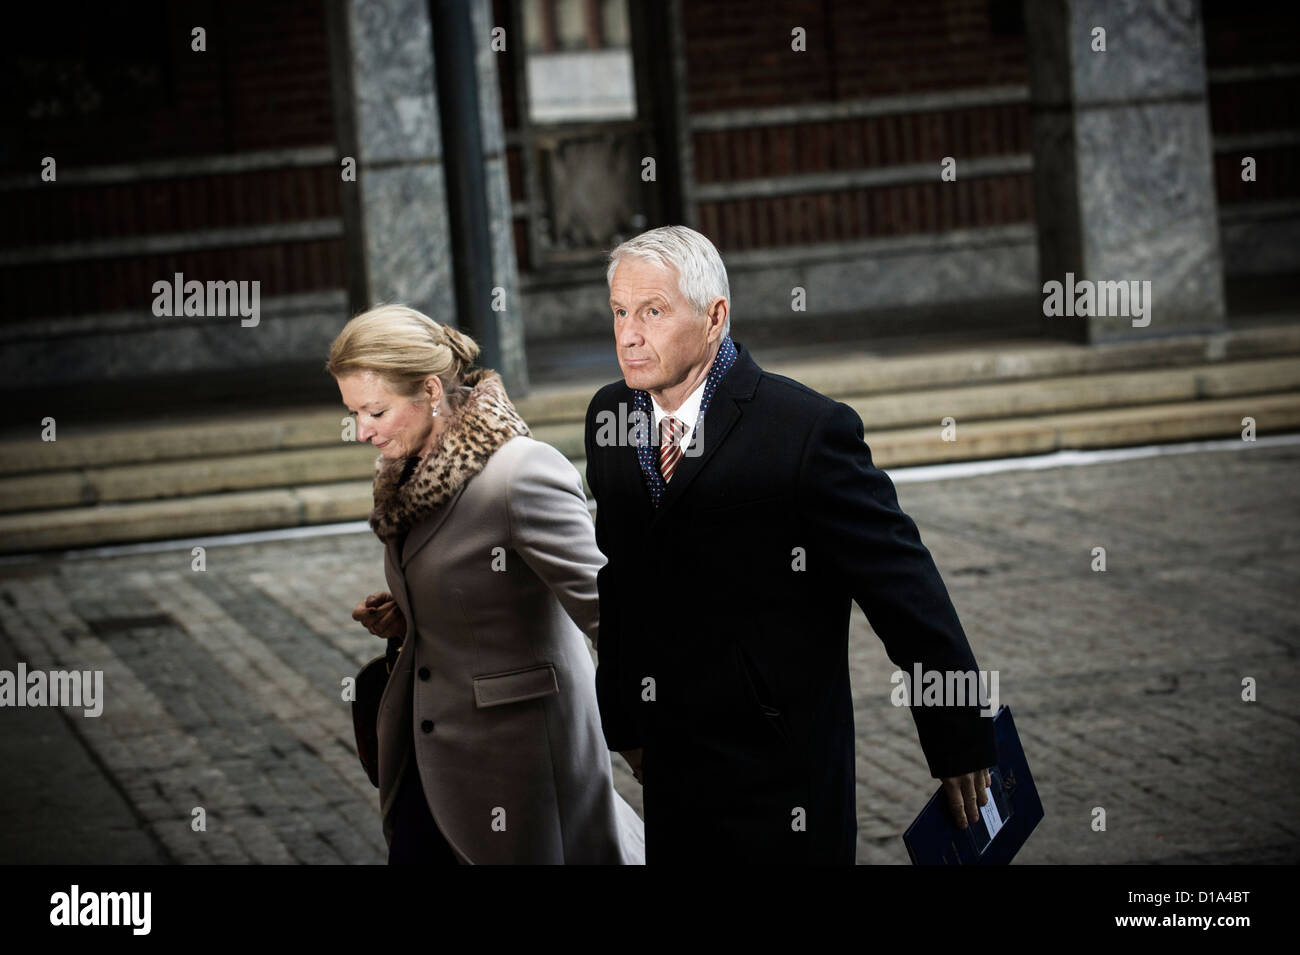 Oslo, Norway. 10/12/2012. Leader of The Norwegian Nobel Committee Thorbjoern Jagland arrives at The Nobel Peace Prize ceremony. Stock Photo